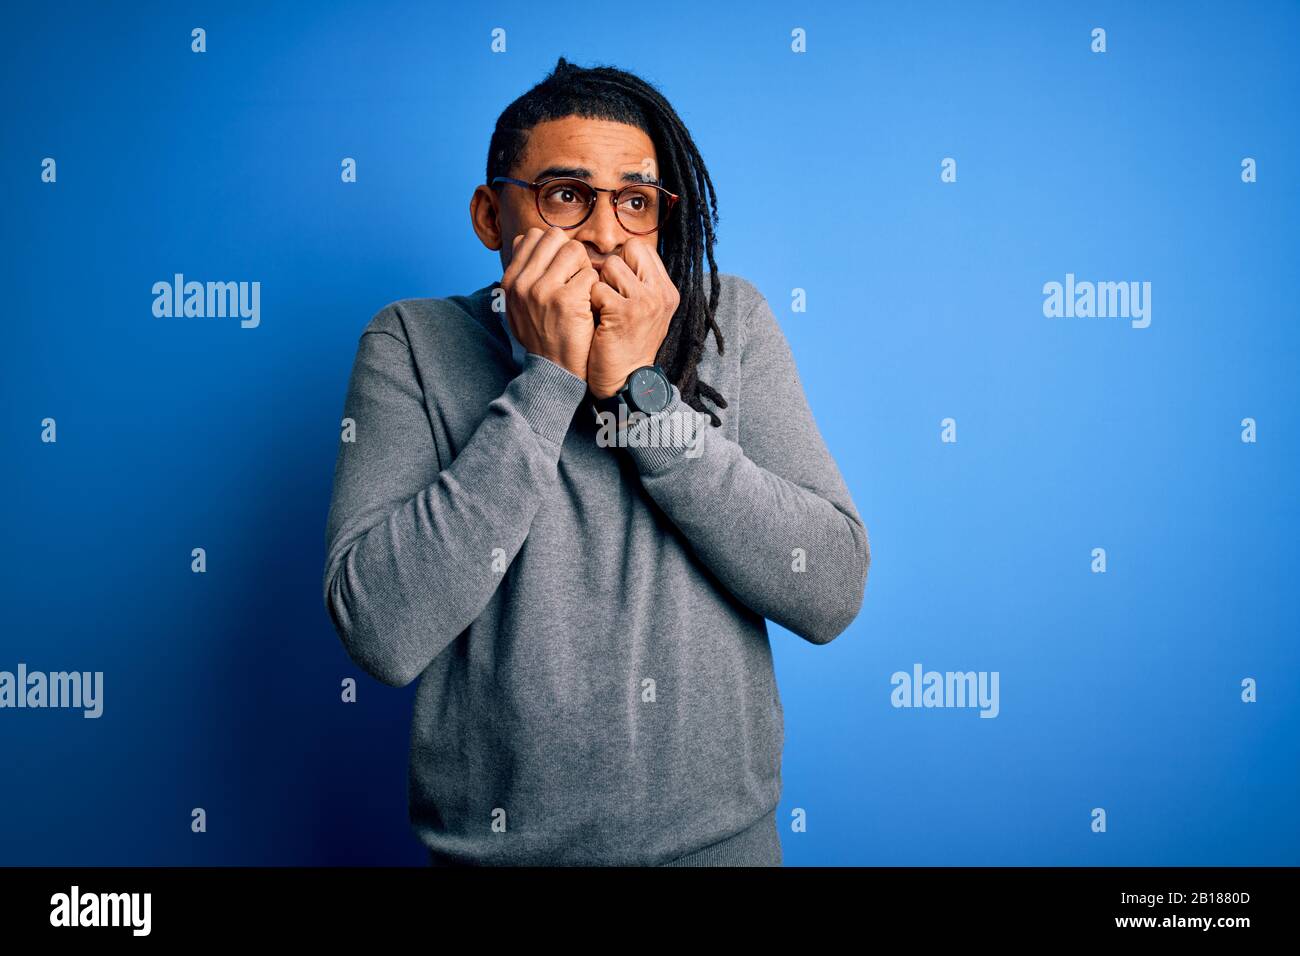 Young handsome african american man with dreadlocks wearing casual sweater and glasses looking stressed and nervous with hands on mouth biting nails. Stock Photo